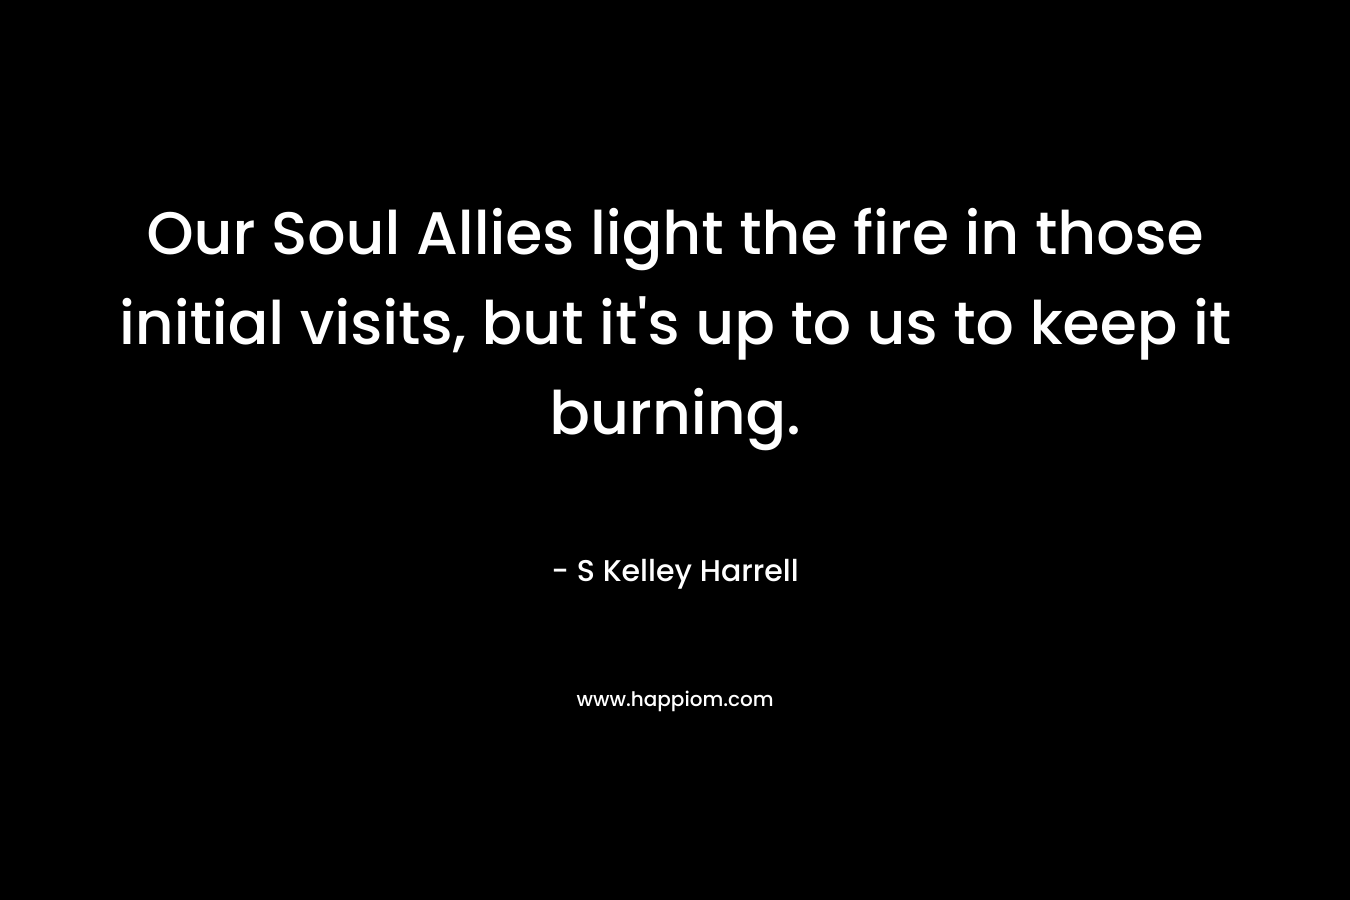 Our Soul Allies light the fire in those initial visits, but it’s up to us to keep it burning. – S Kelley Harrell